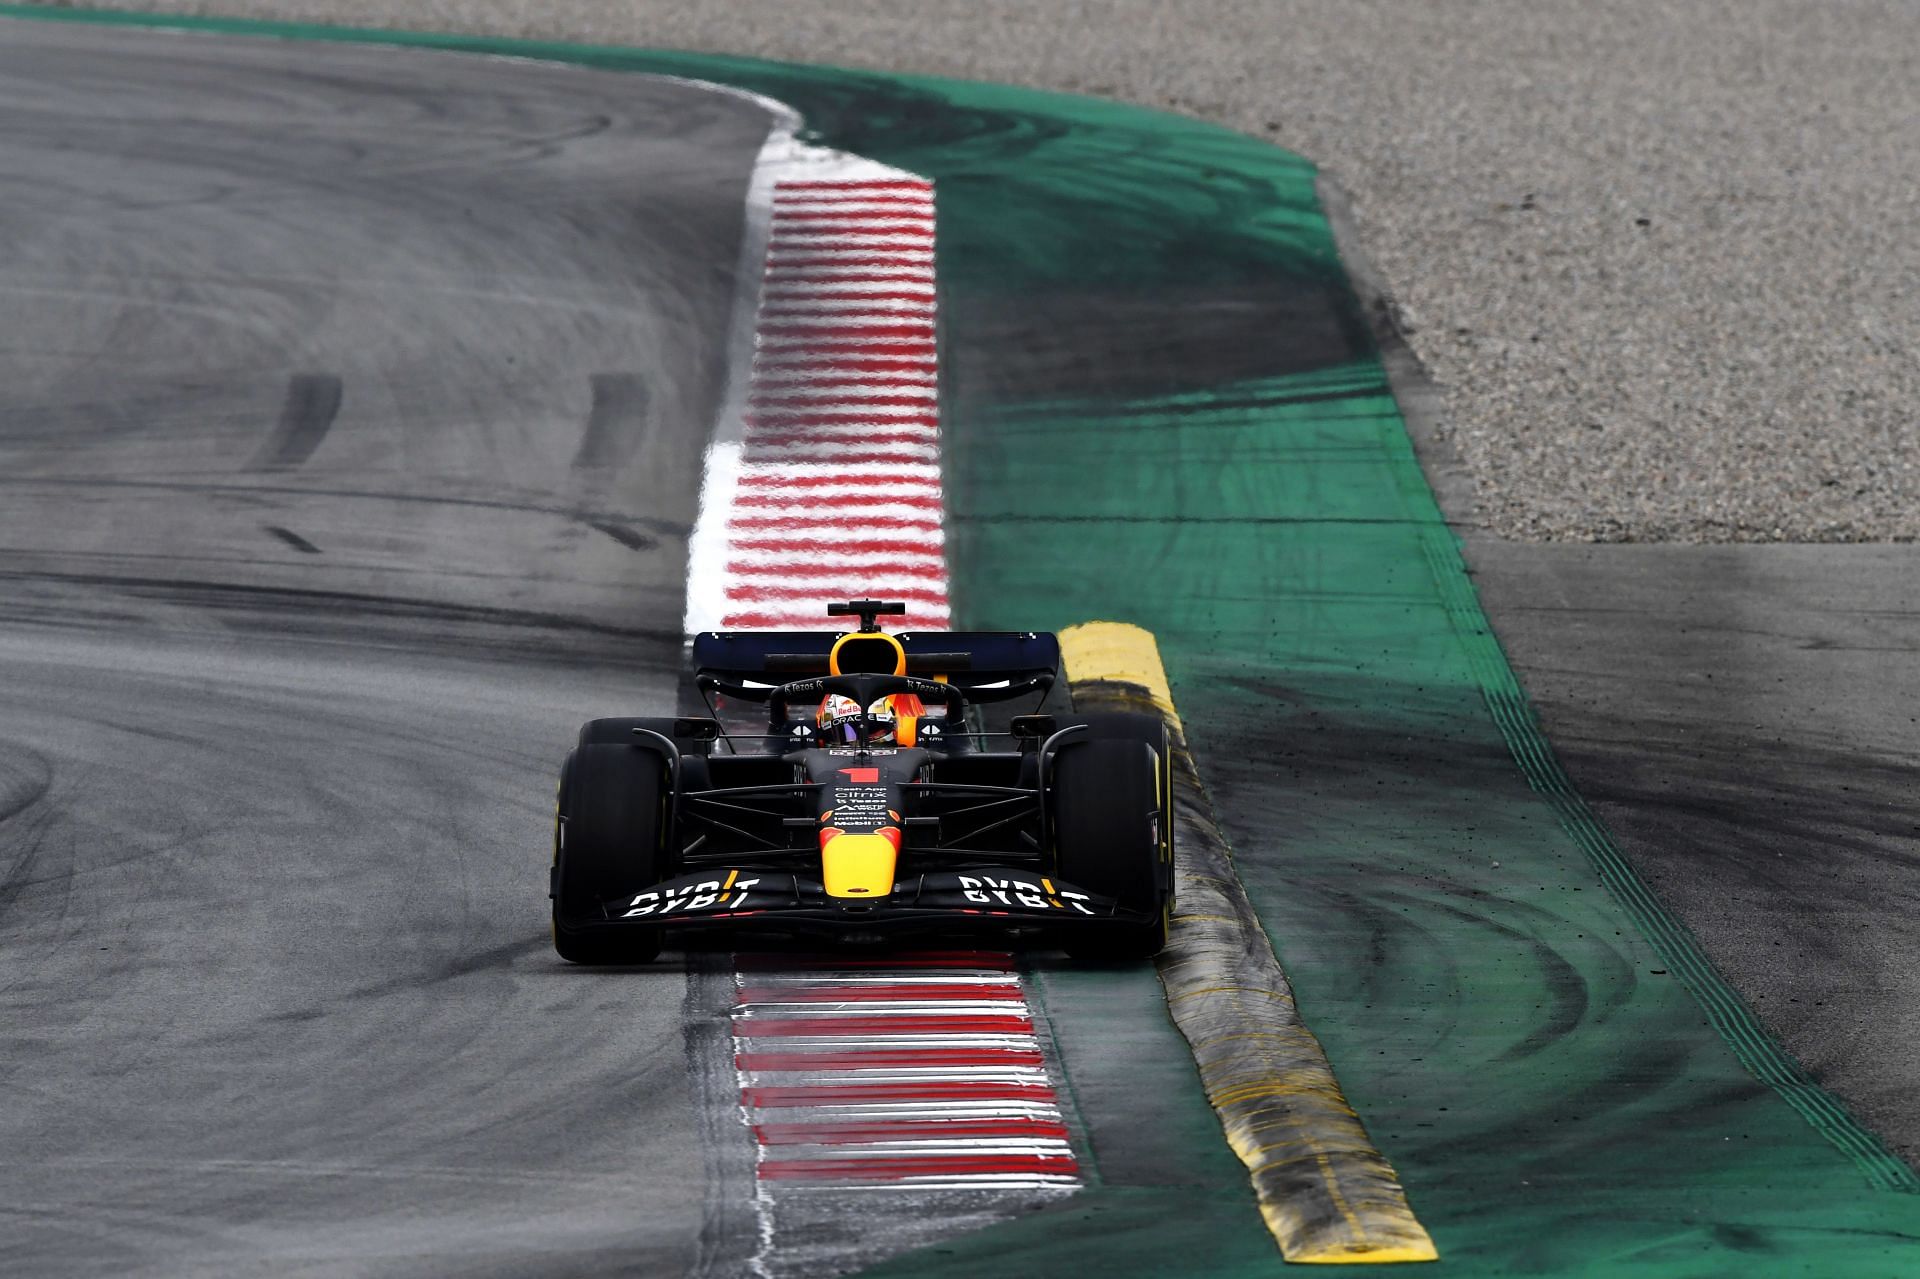 Max Verstappen in action during pre-season testing in Barcelona (Photo by Rudy Carezzevoli/Getty Images)